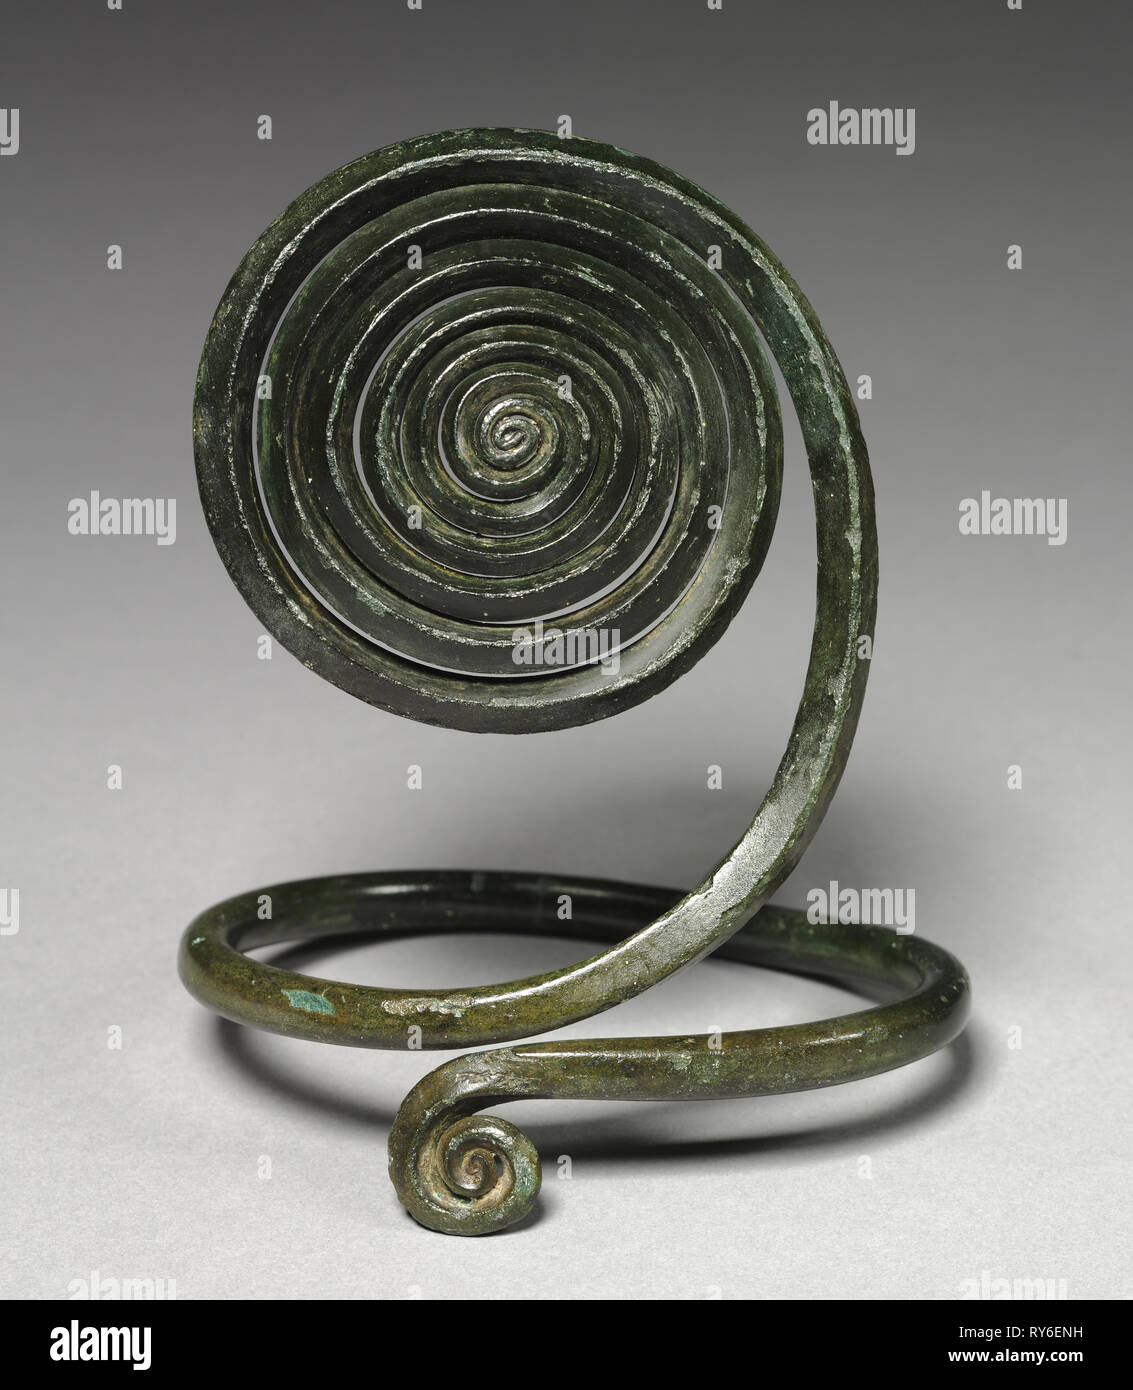 Spiral Armilla, c. 1500 BC. Central Europe, Bronze Age, c. 2500-800 BC. Bronze, wrought; overall: 16.5 x 12.1 cm (6 1/2 x 4 3/4 in Stock Photo